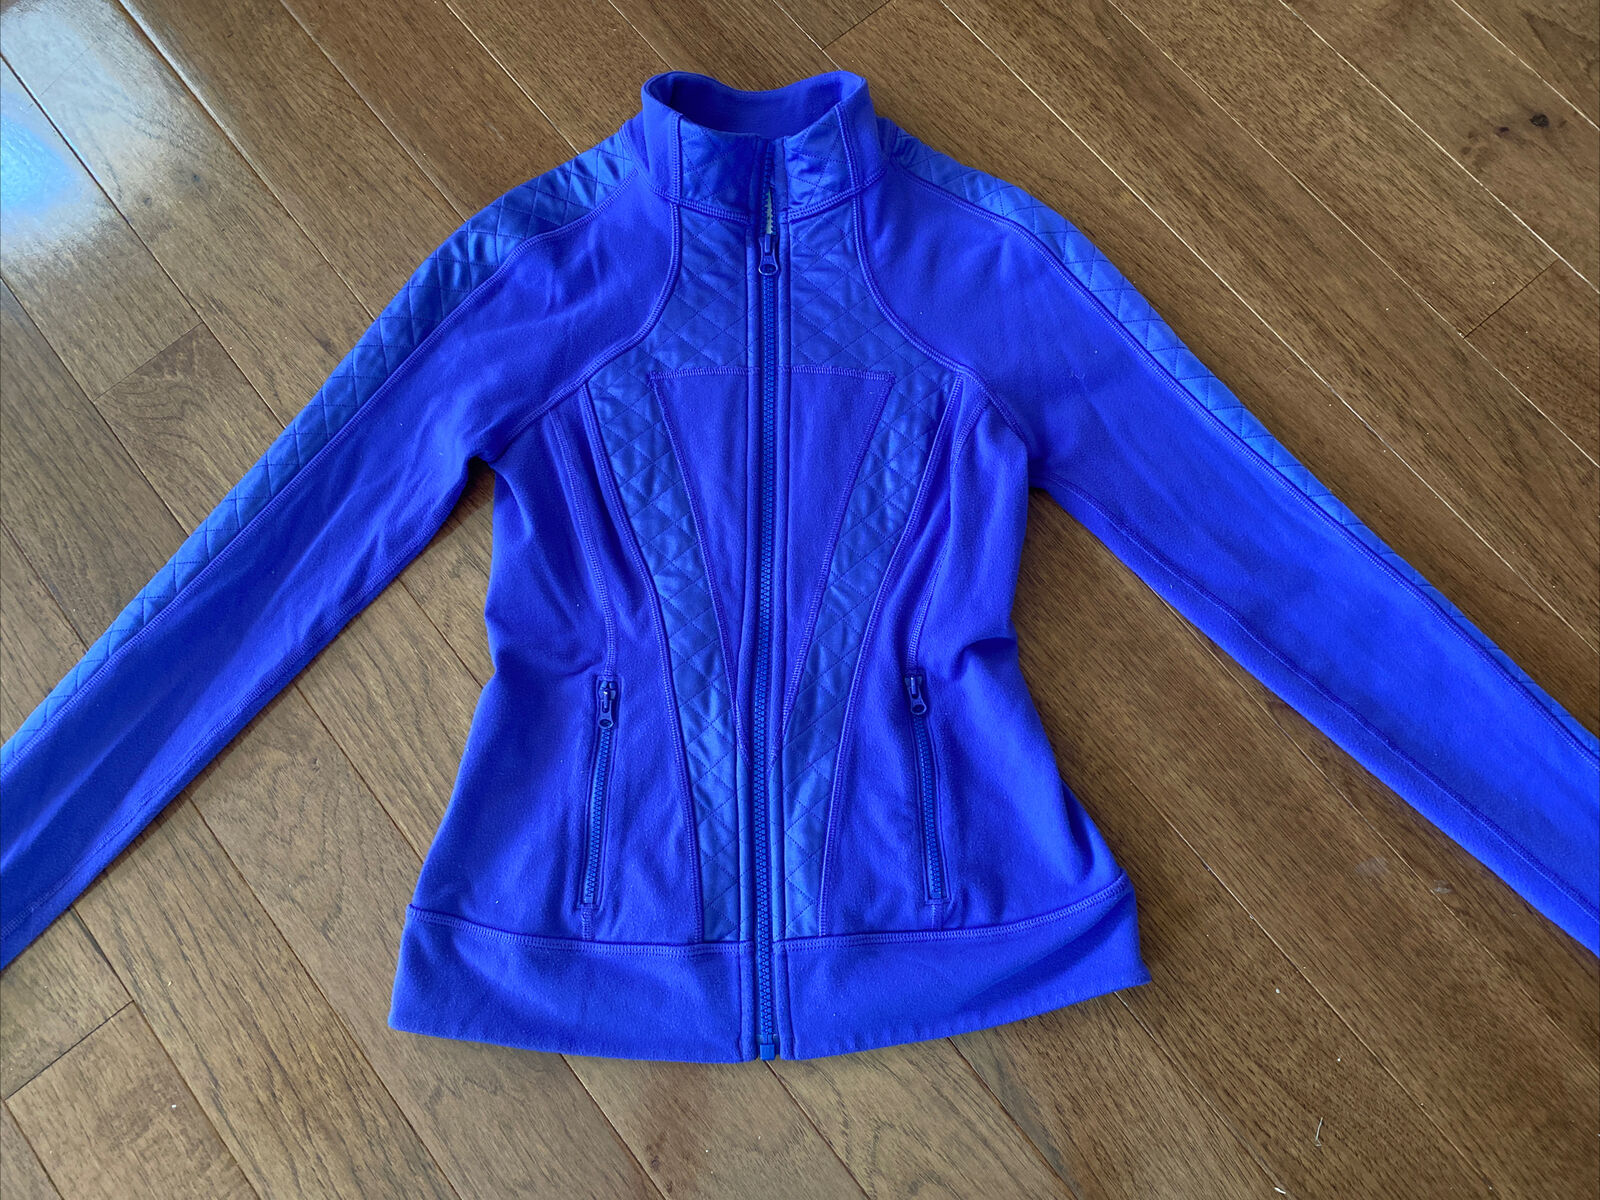 Ivivva By Lululemon Girls Full Zip Polyester Guc Athletic Top Jacket Size 12